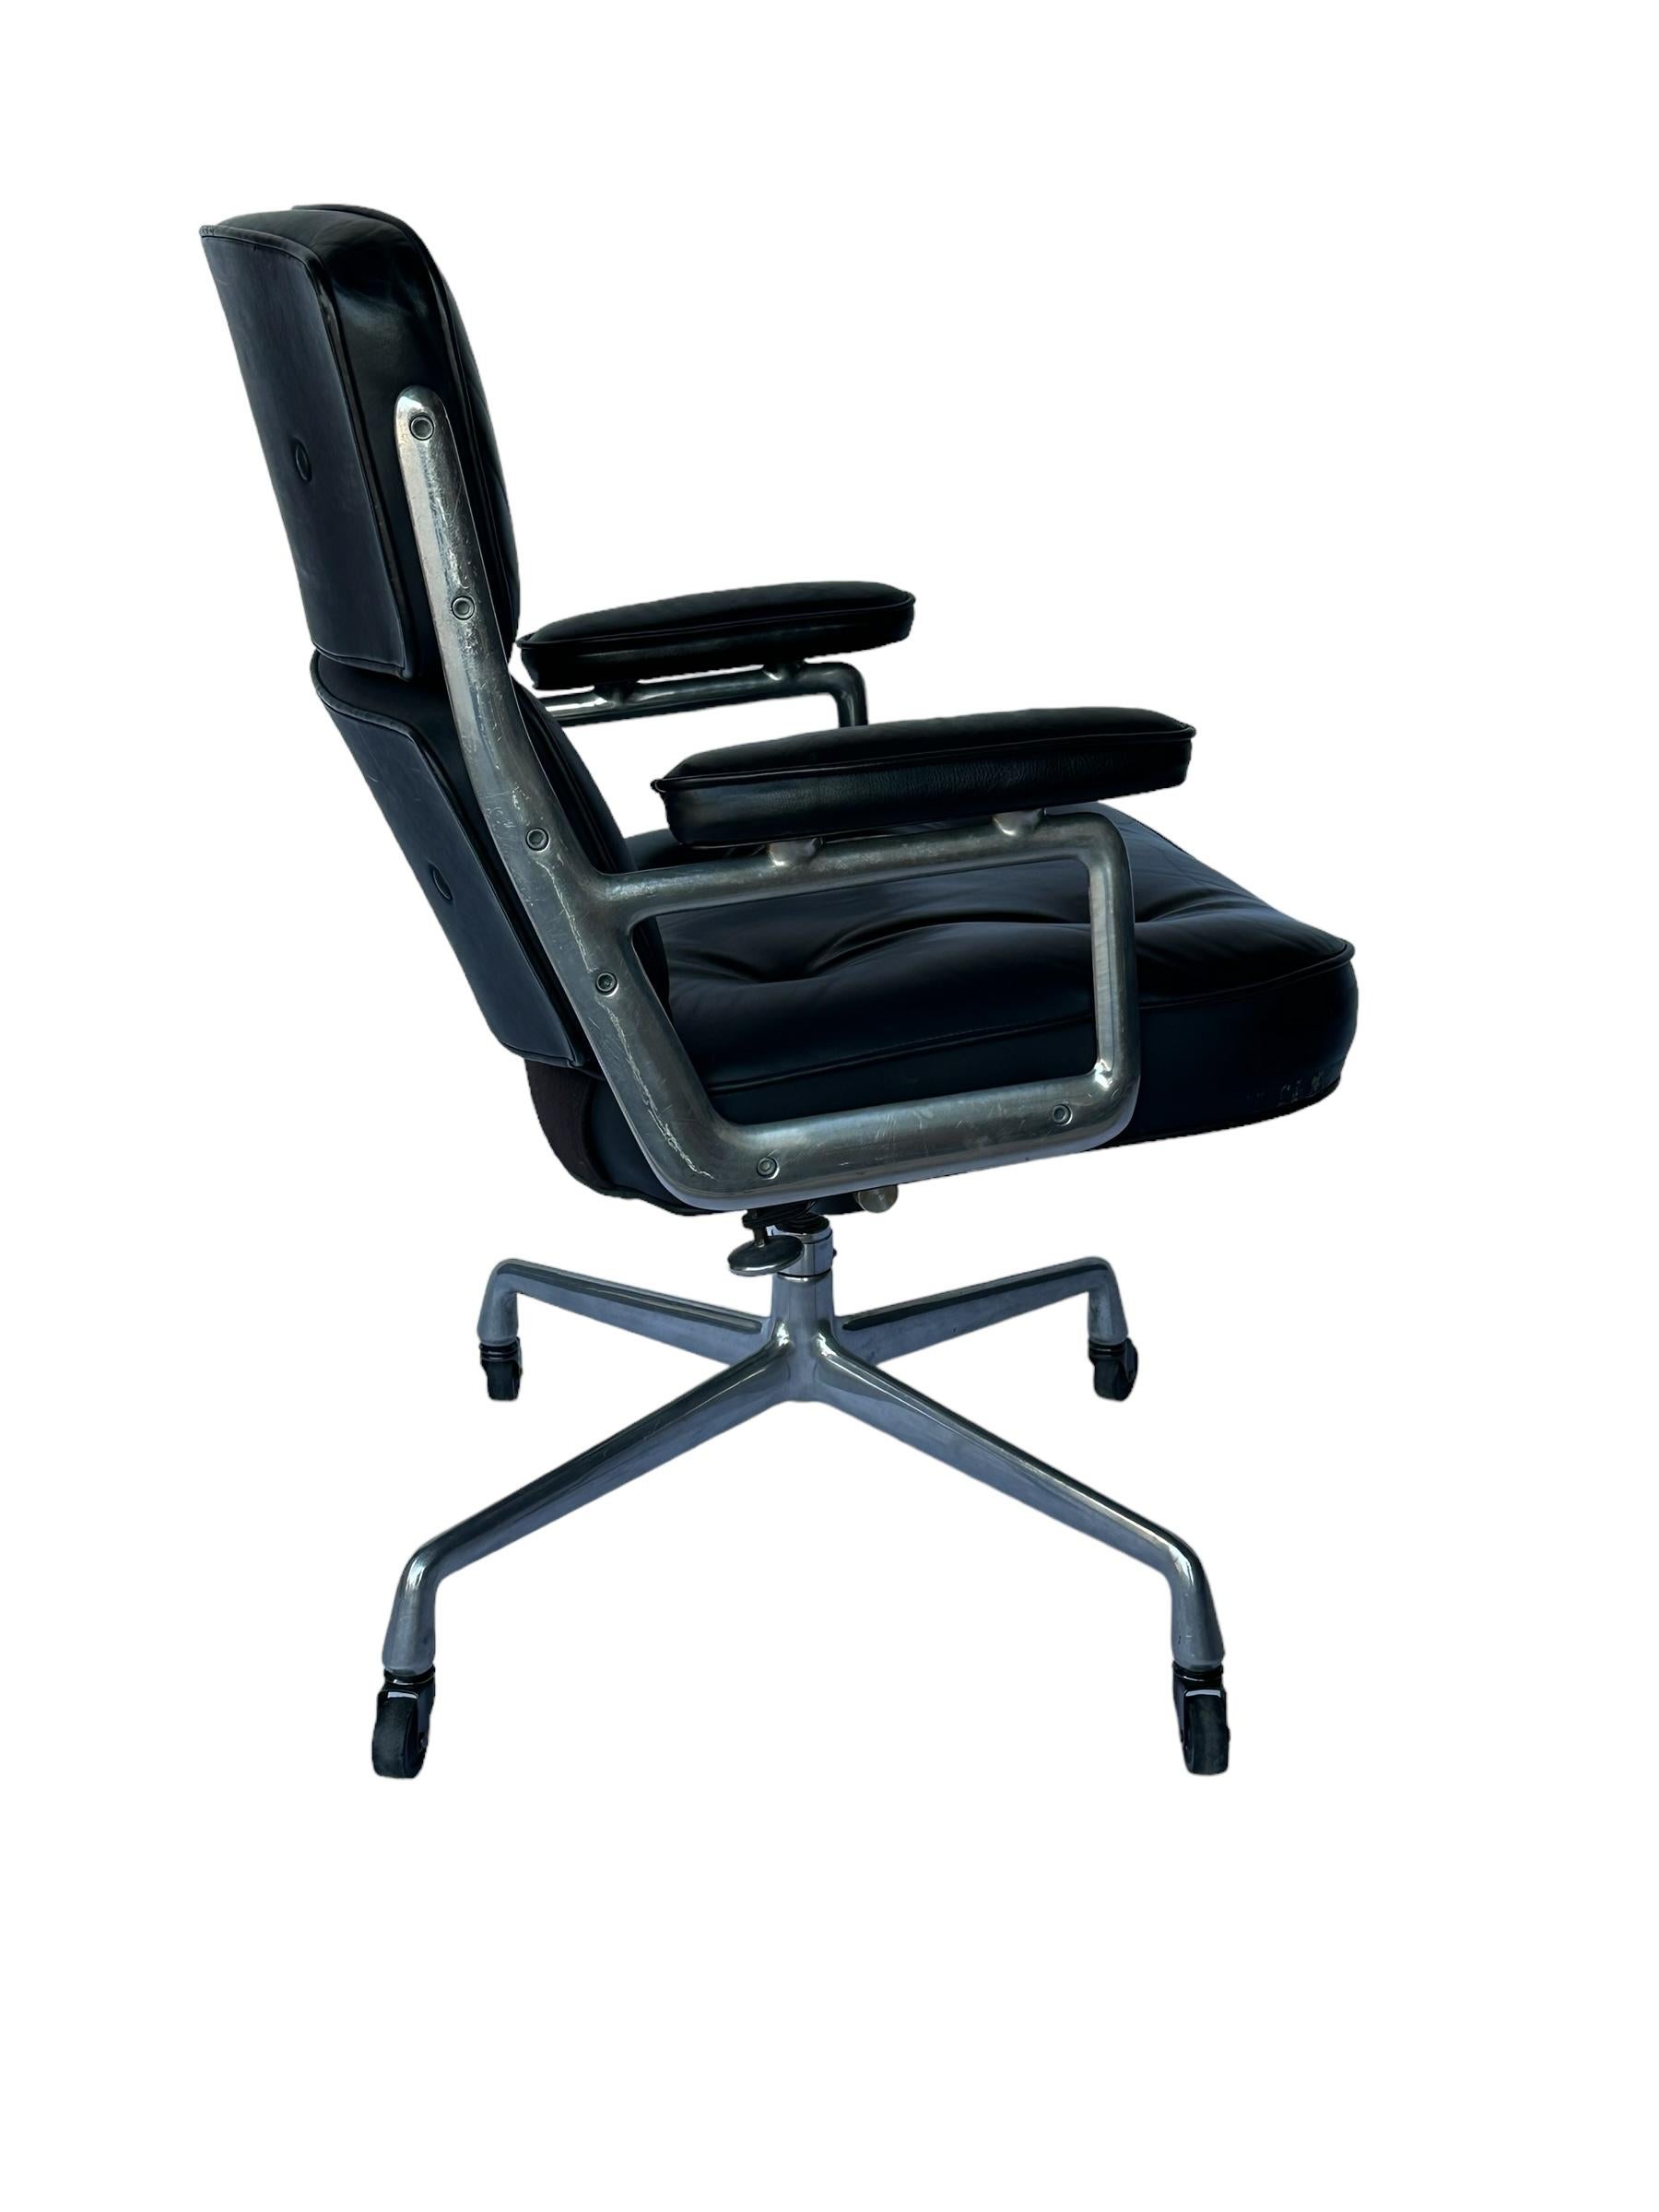 American Eames Time Life Office Desk Chair in Black Leather For Sale